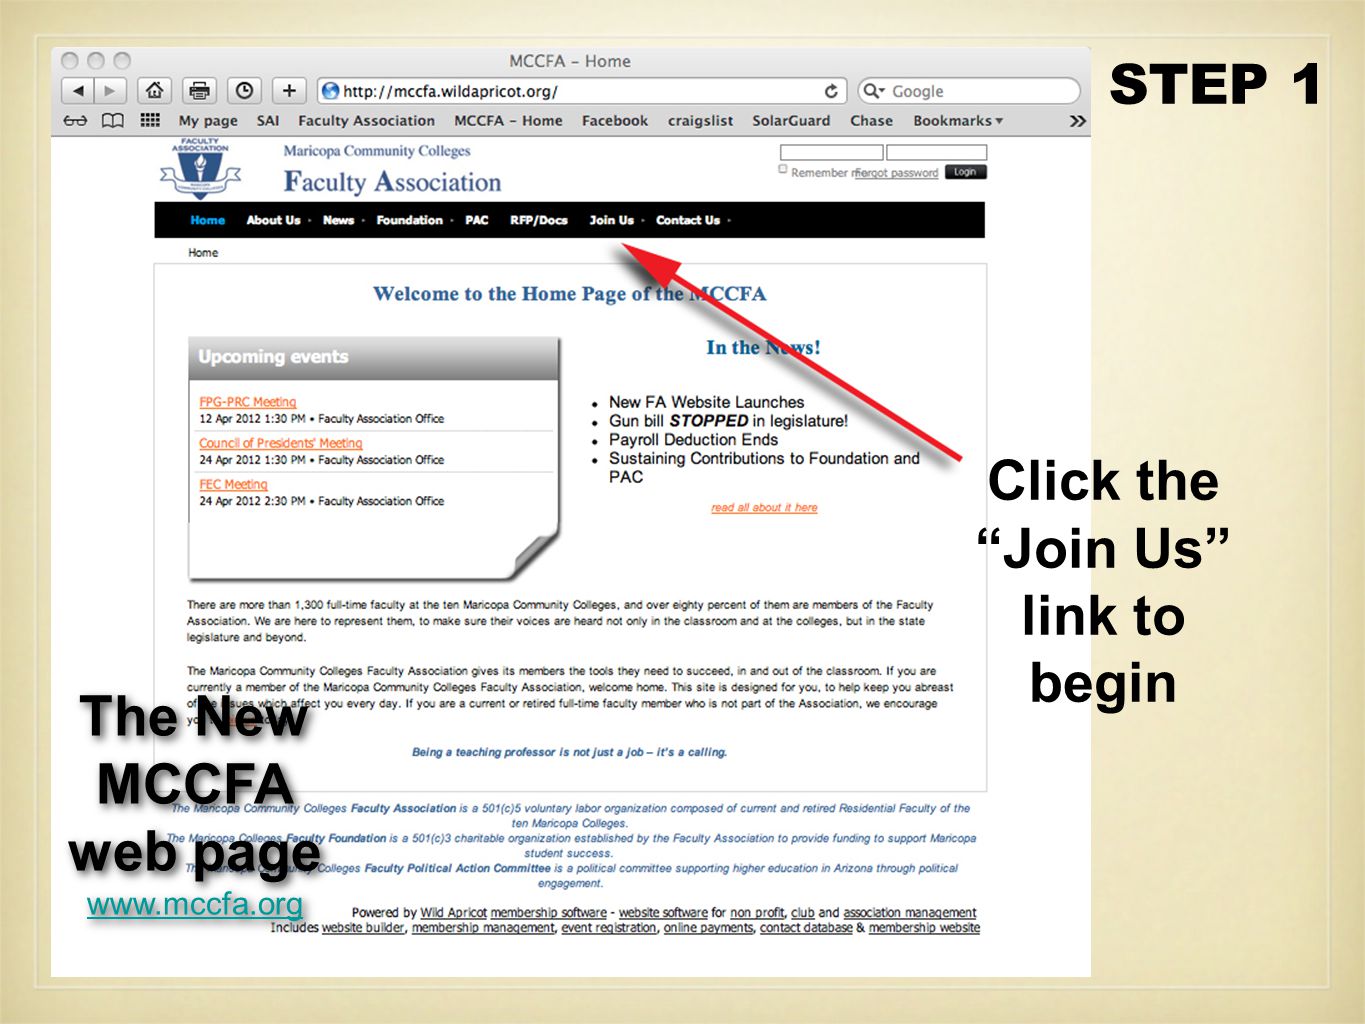 The New MCCFA web page   The New MCCFA web page   Click the Join Us link to begin STEP 1